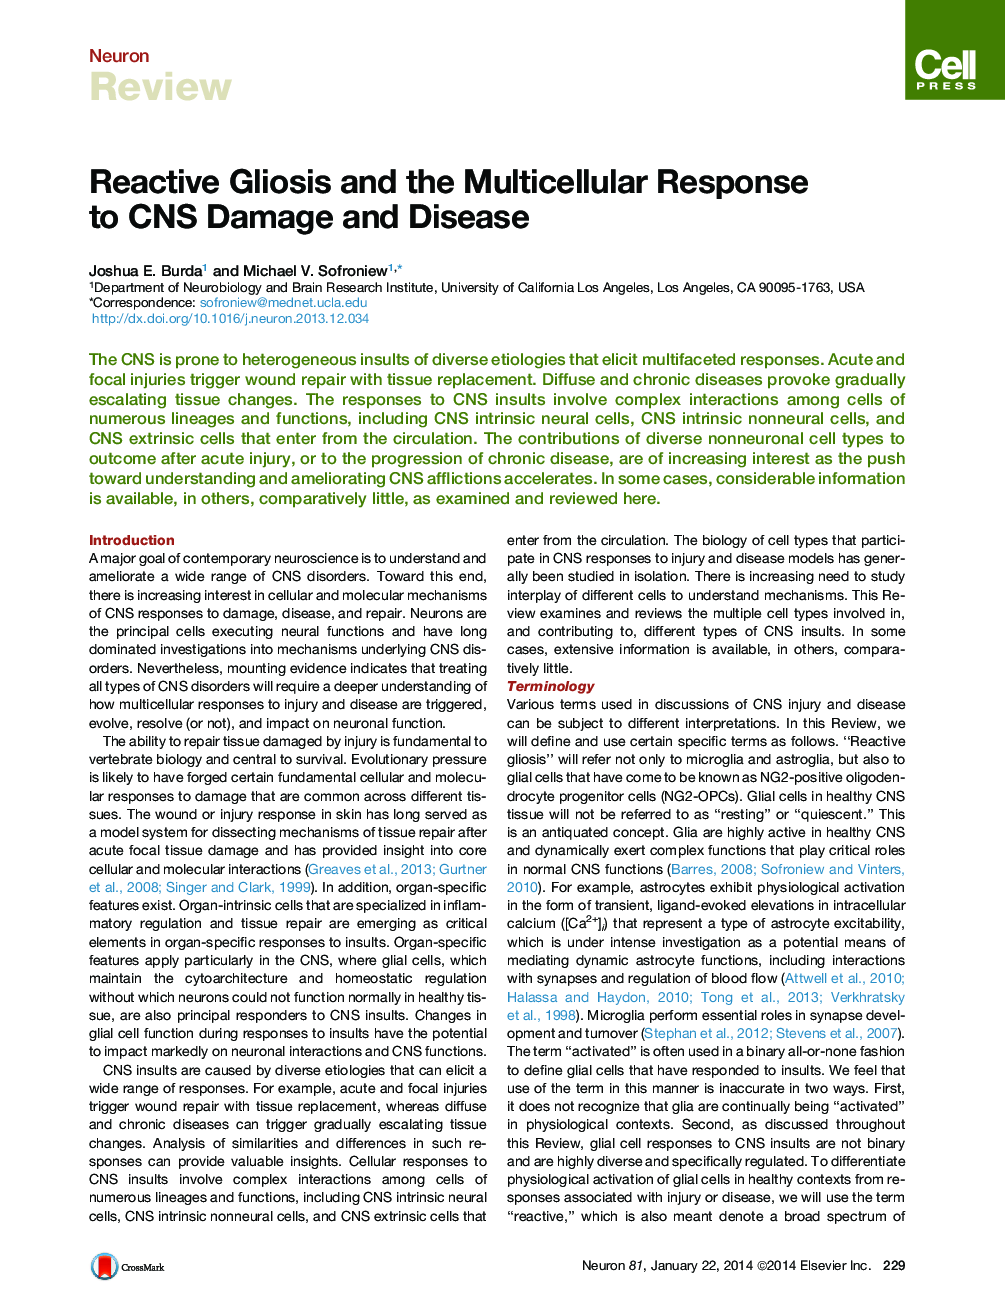 Reactive Gliosis and the Multicellular Response to CNS Damage and Disease